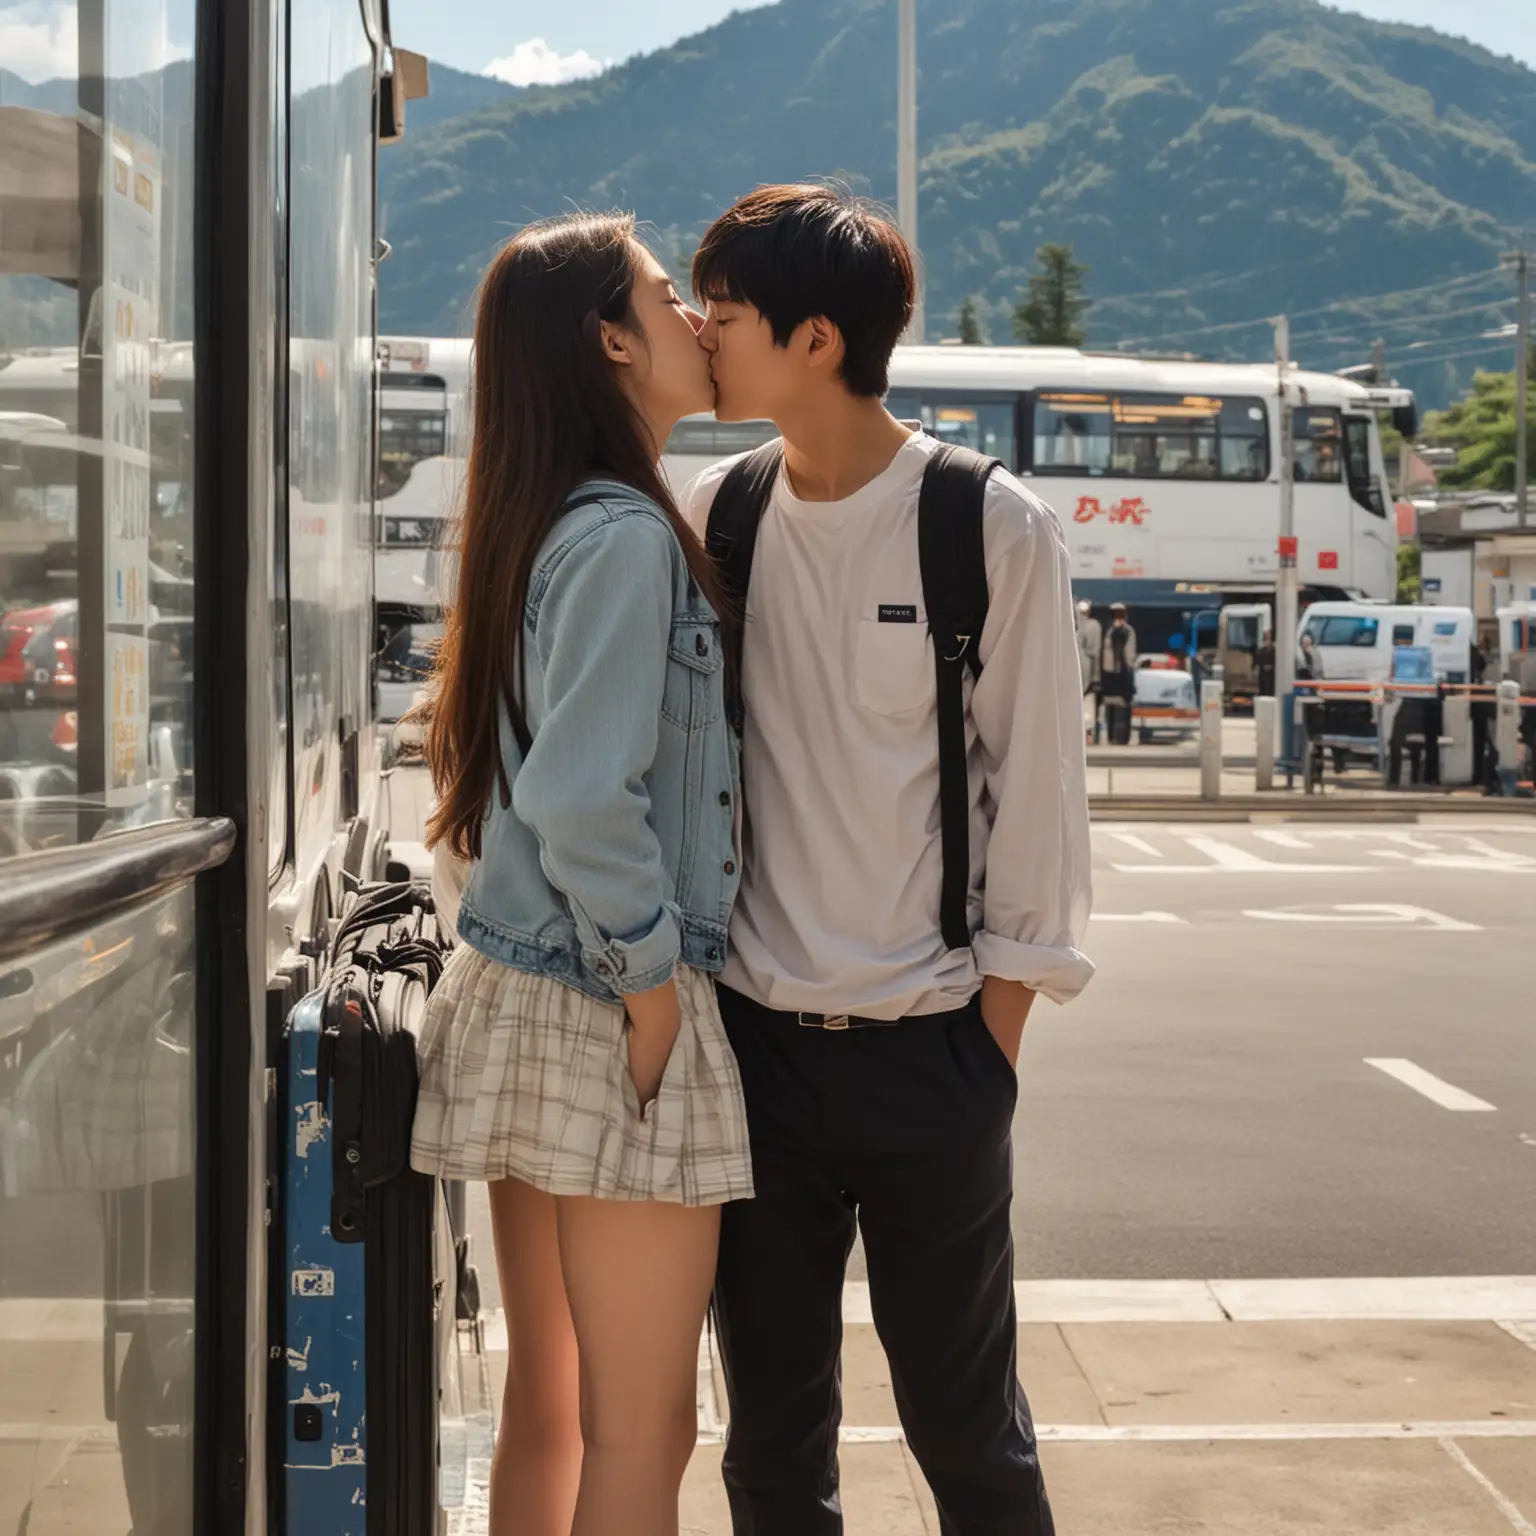 Japanese-Teenage-Couple-Kissing-at-Mountain-View-Bus-Station